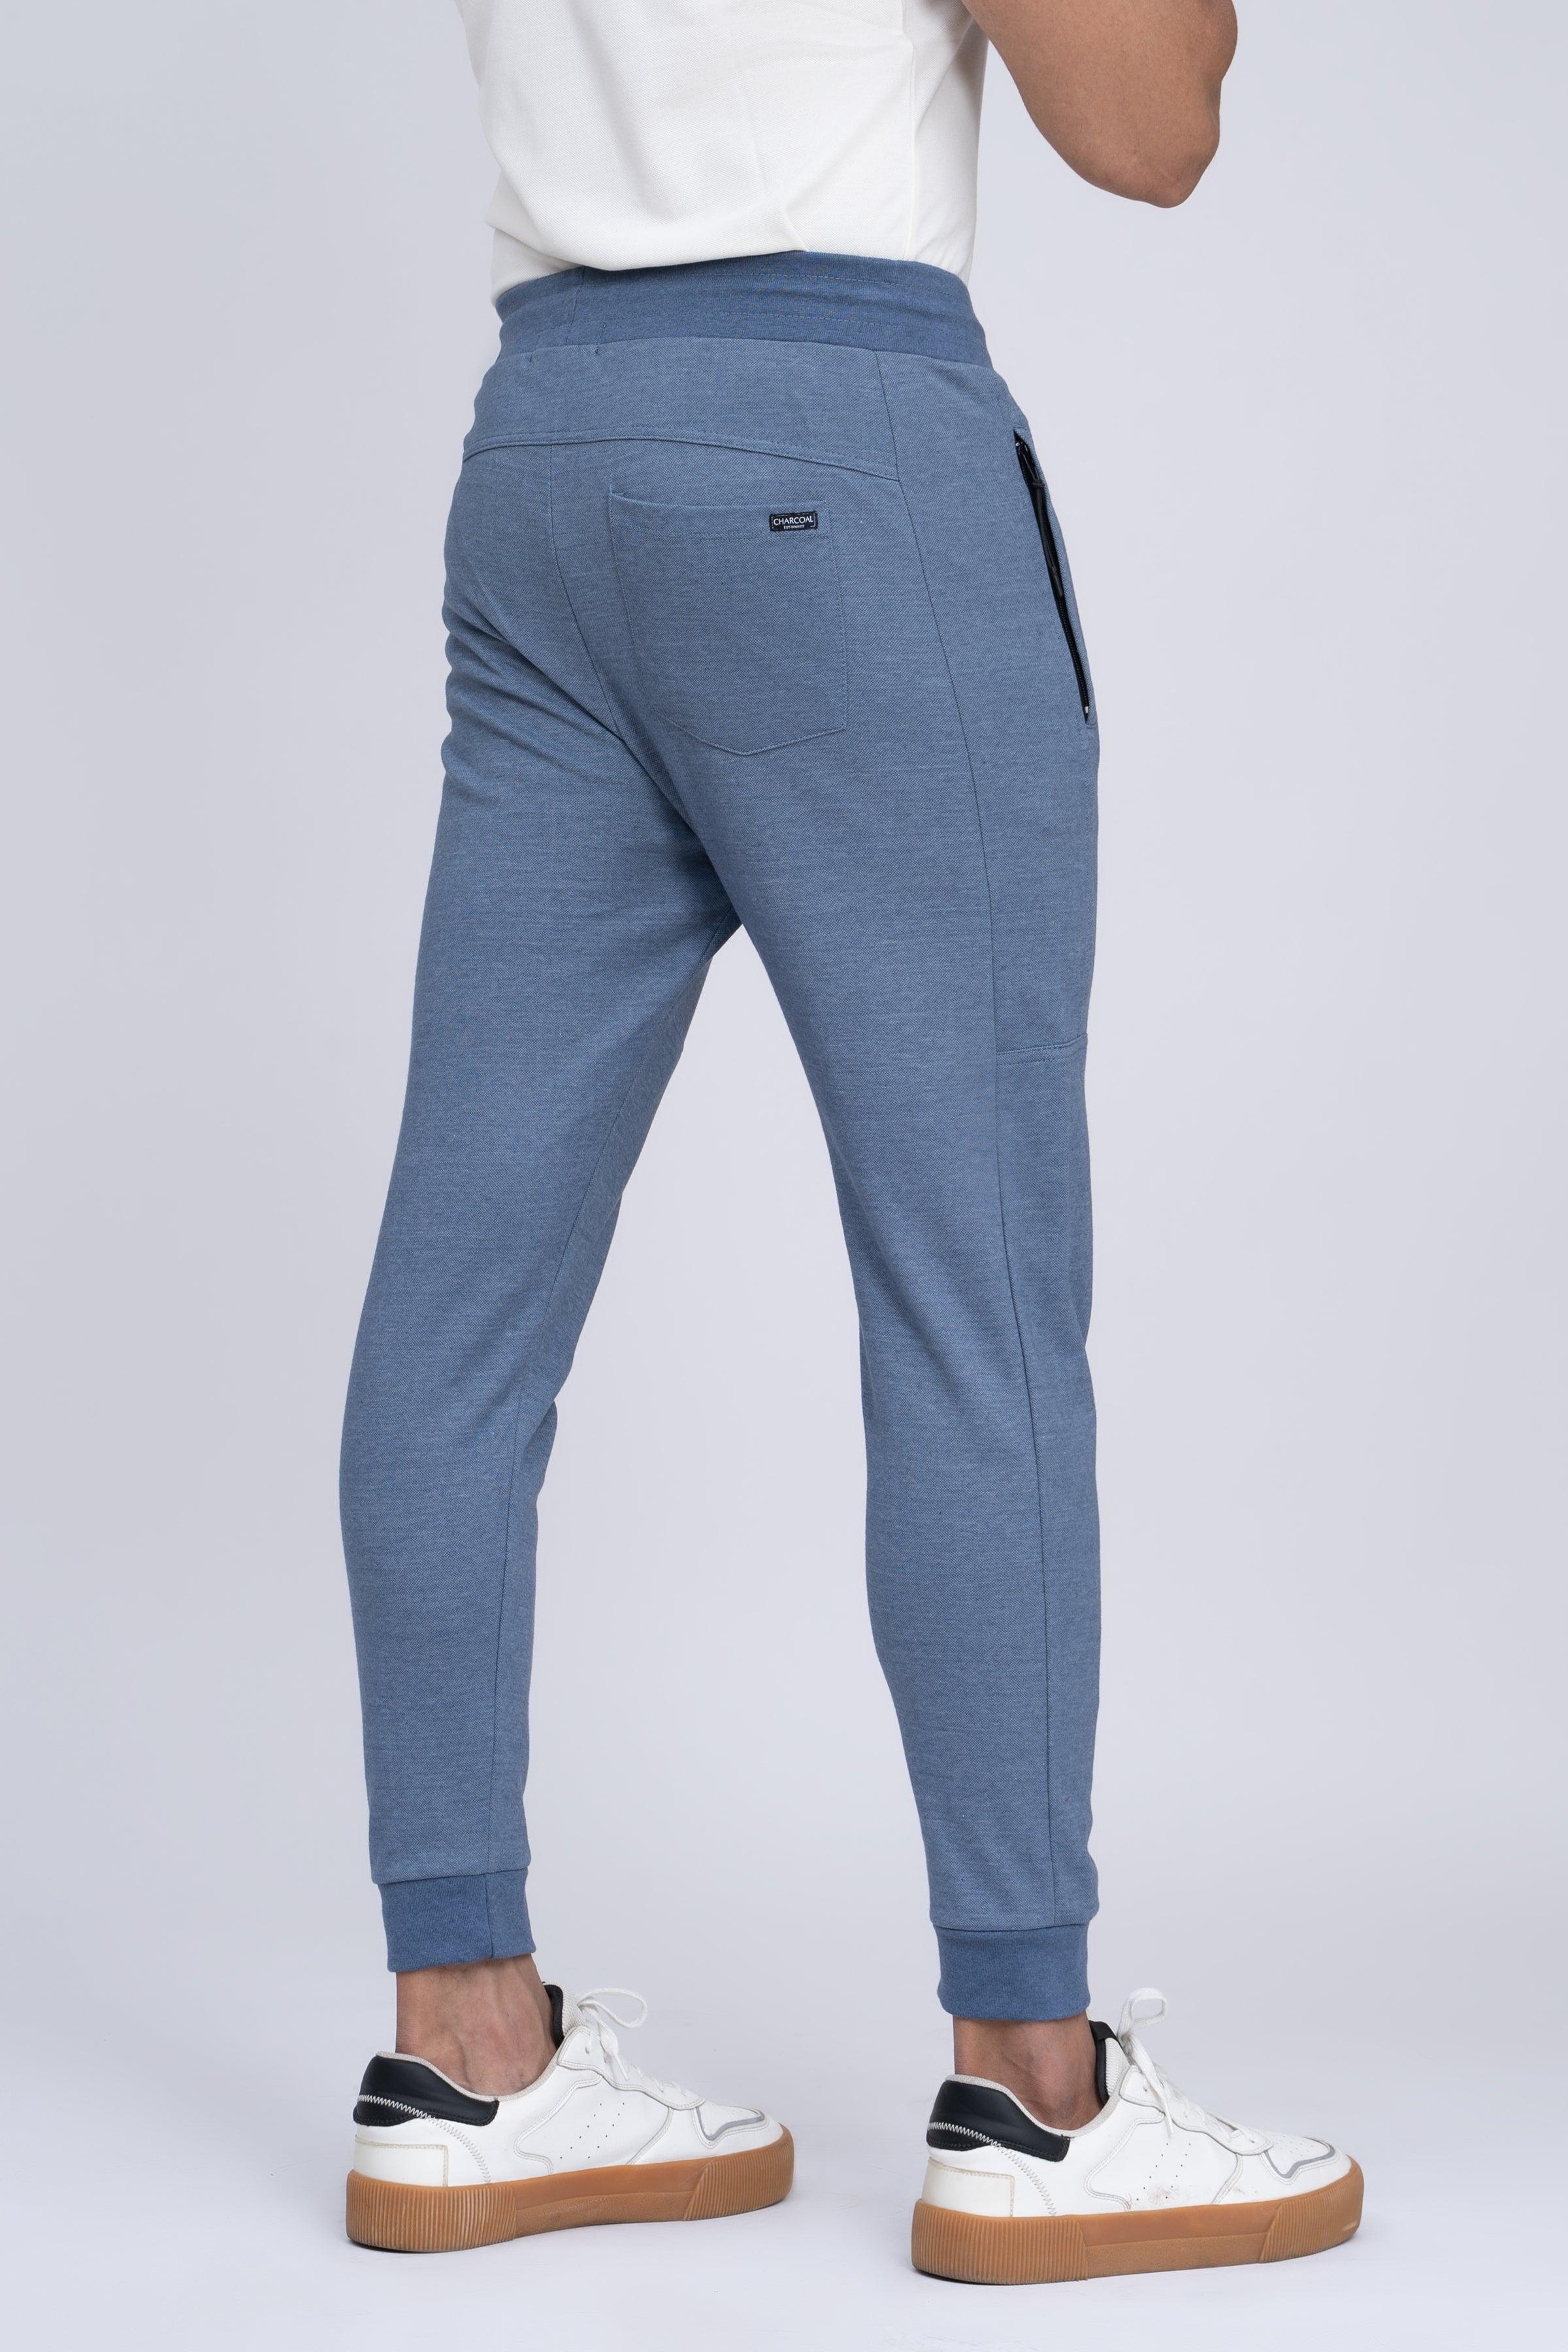 PIQUE INTERLOCK TROUSER BLUE at Charcoal Clothing